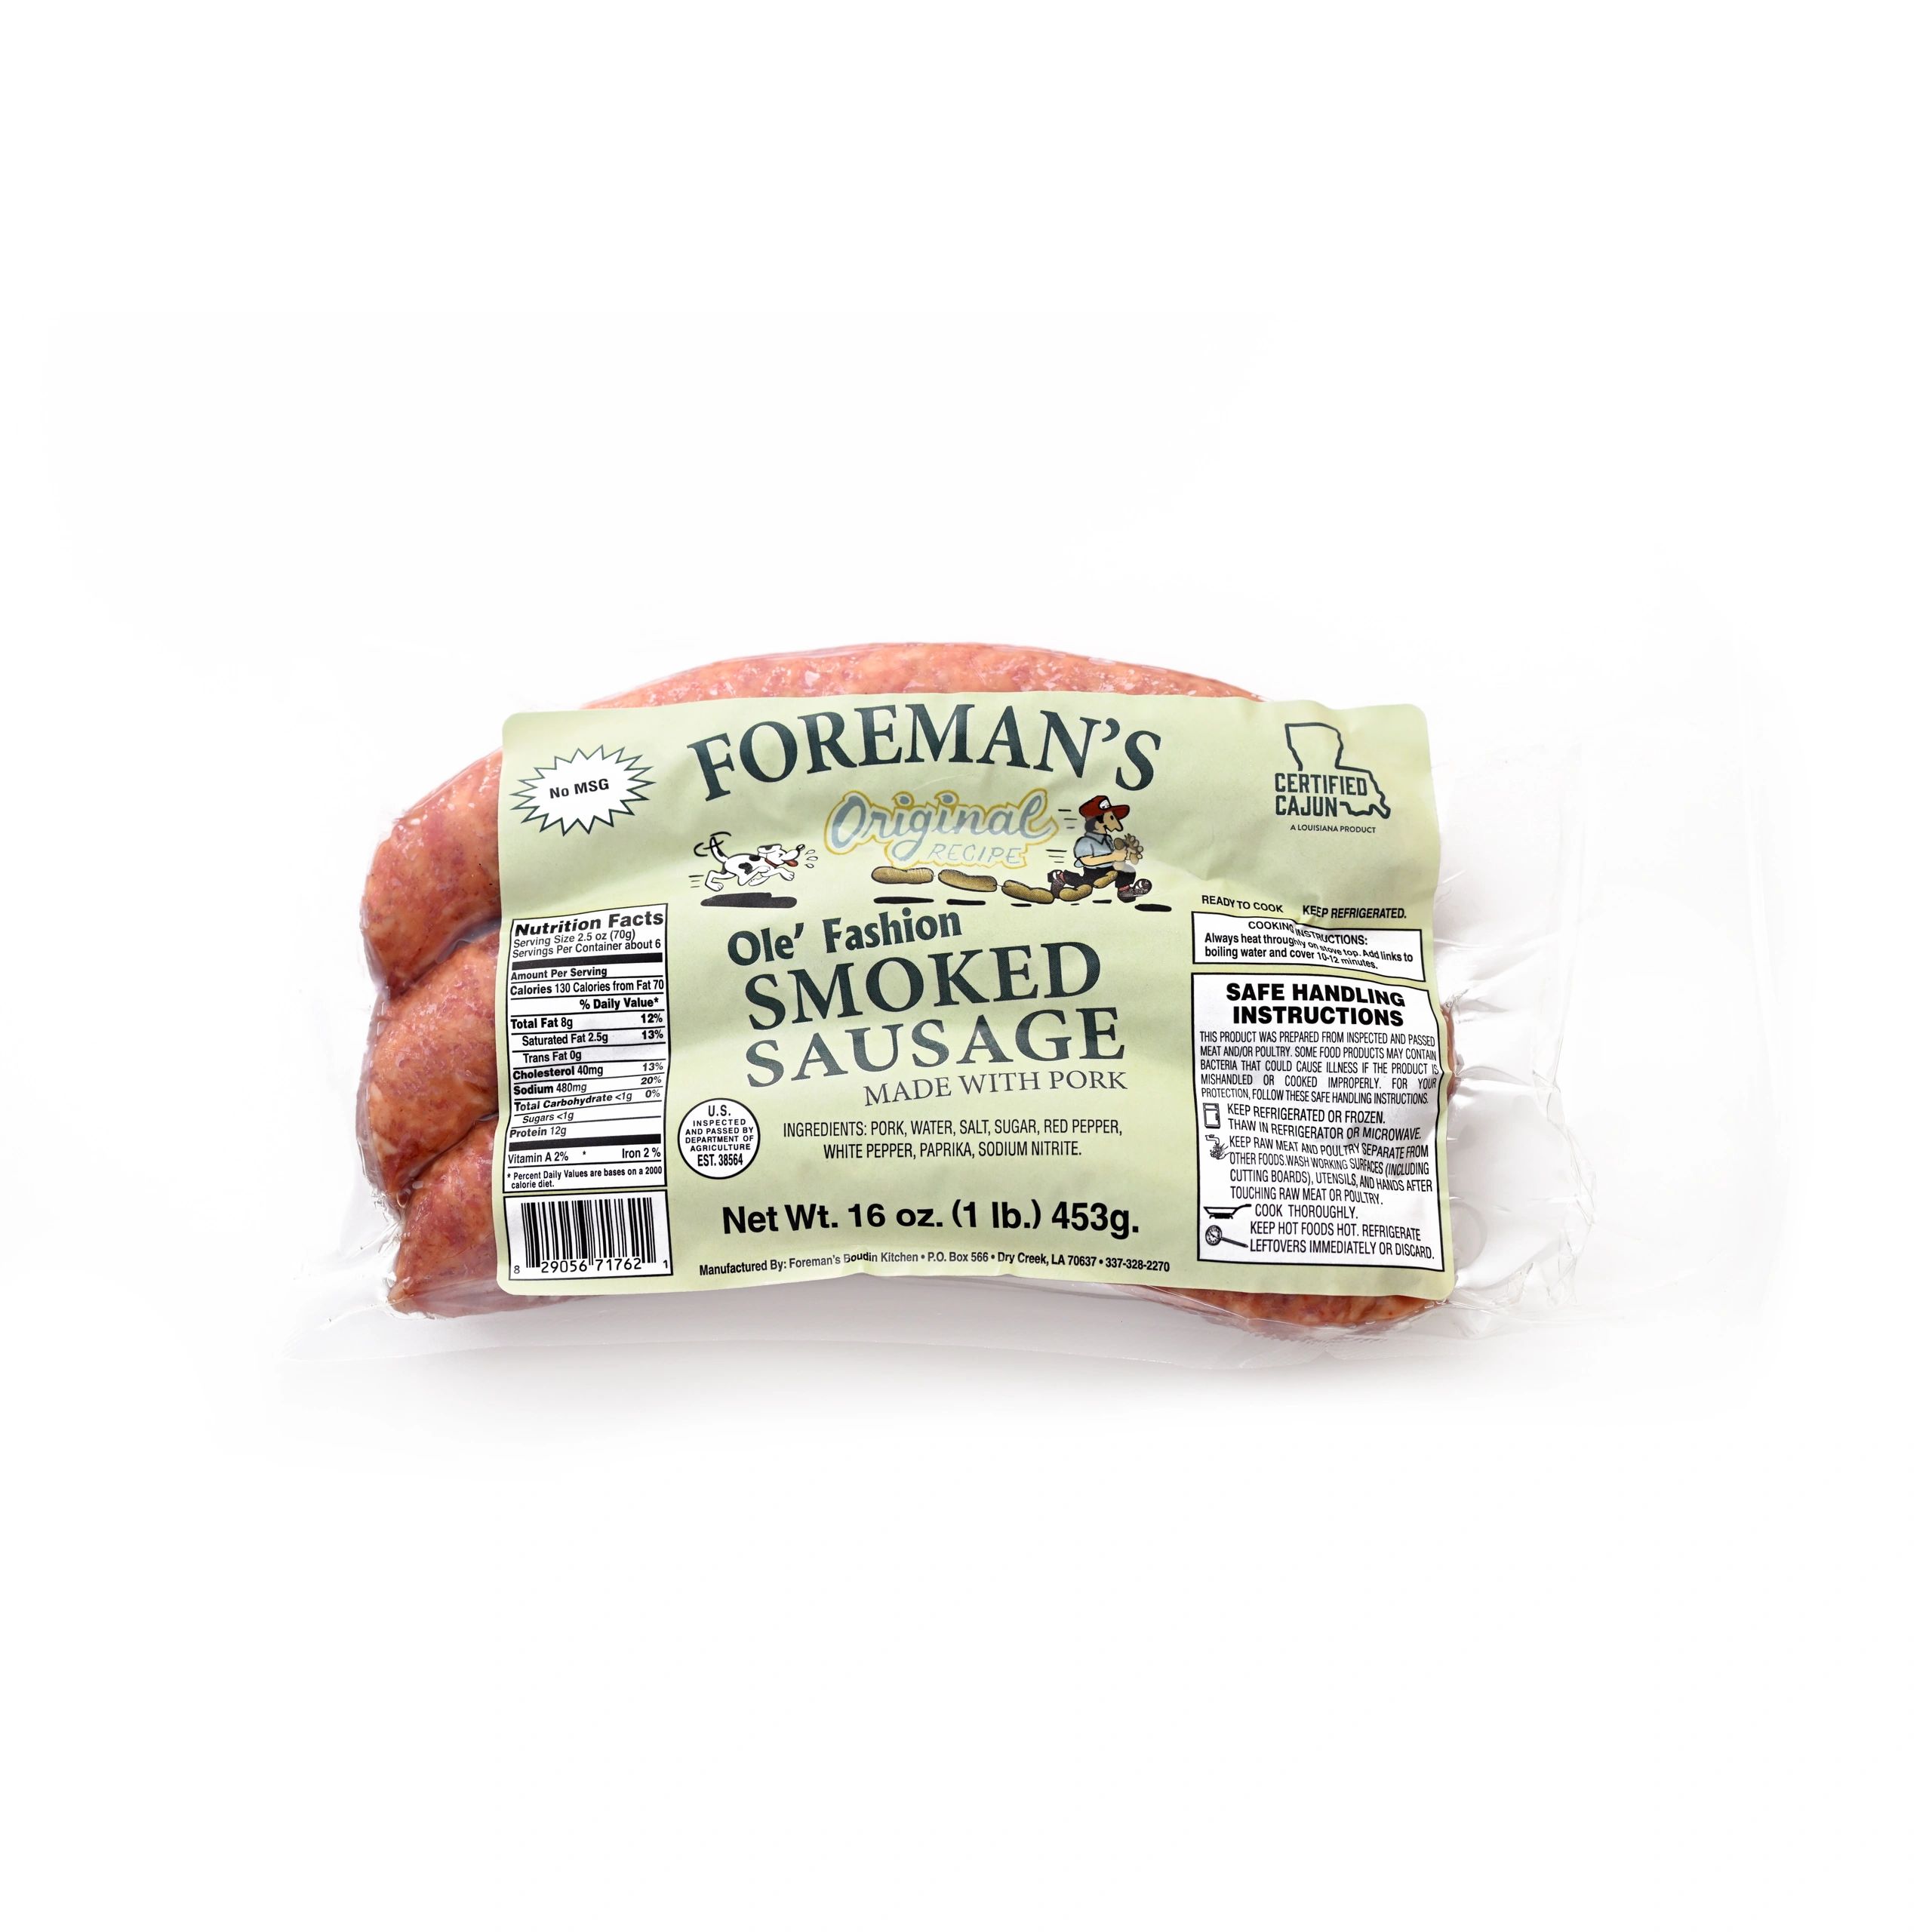 Foremans Ole Fashion Smoked Sausage made with in a 16 oz package on a white background.